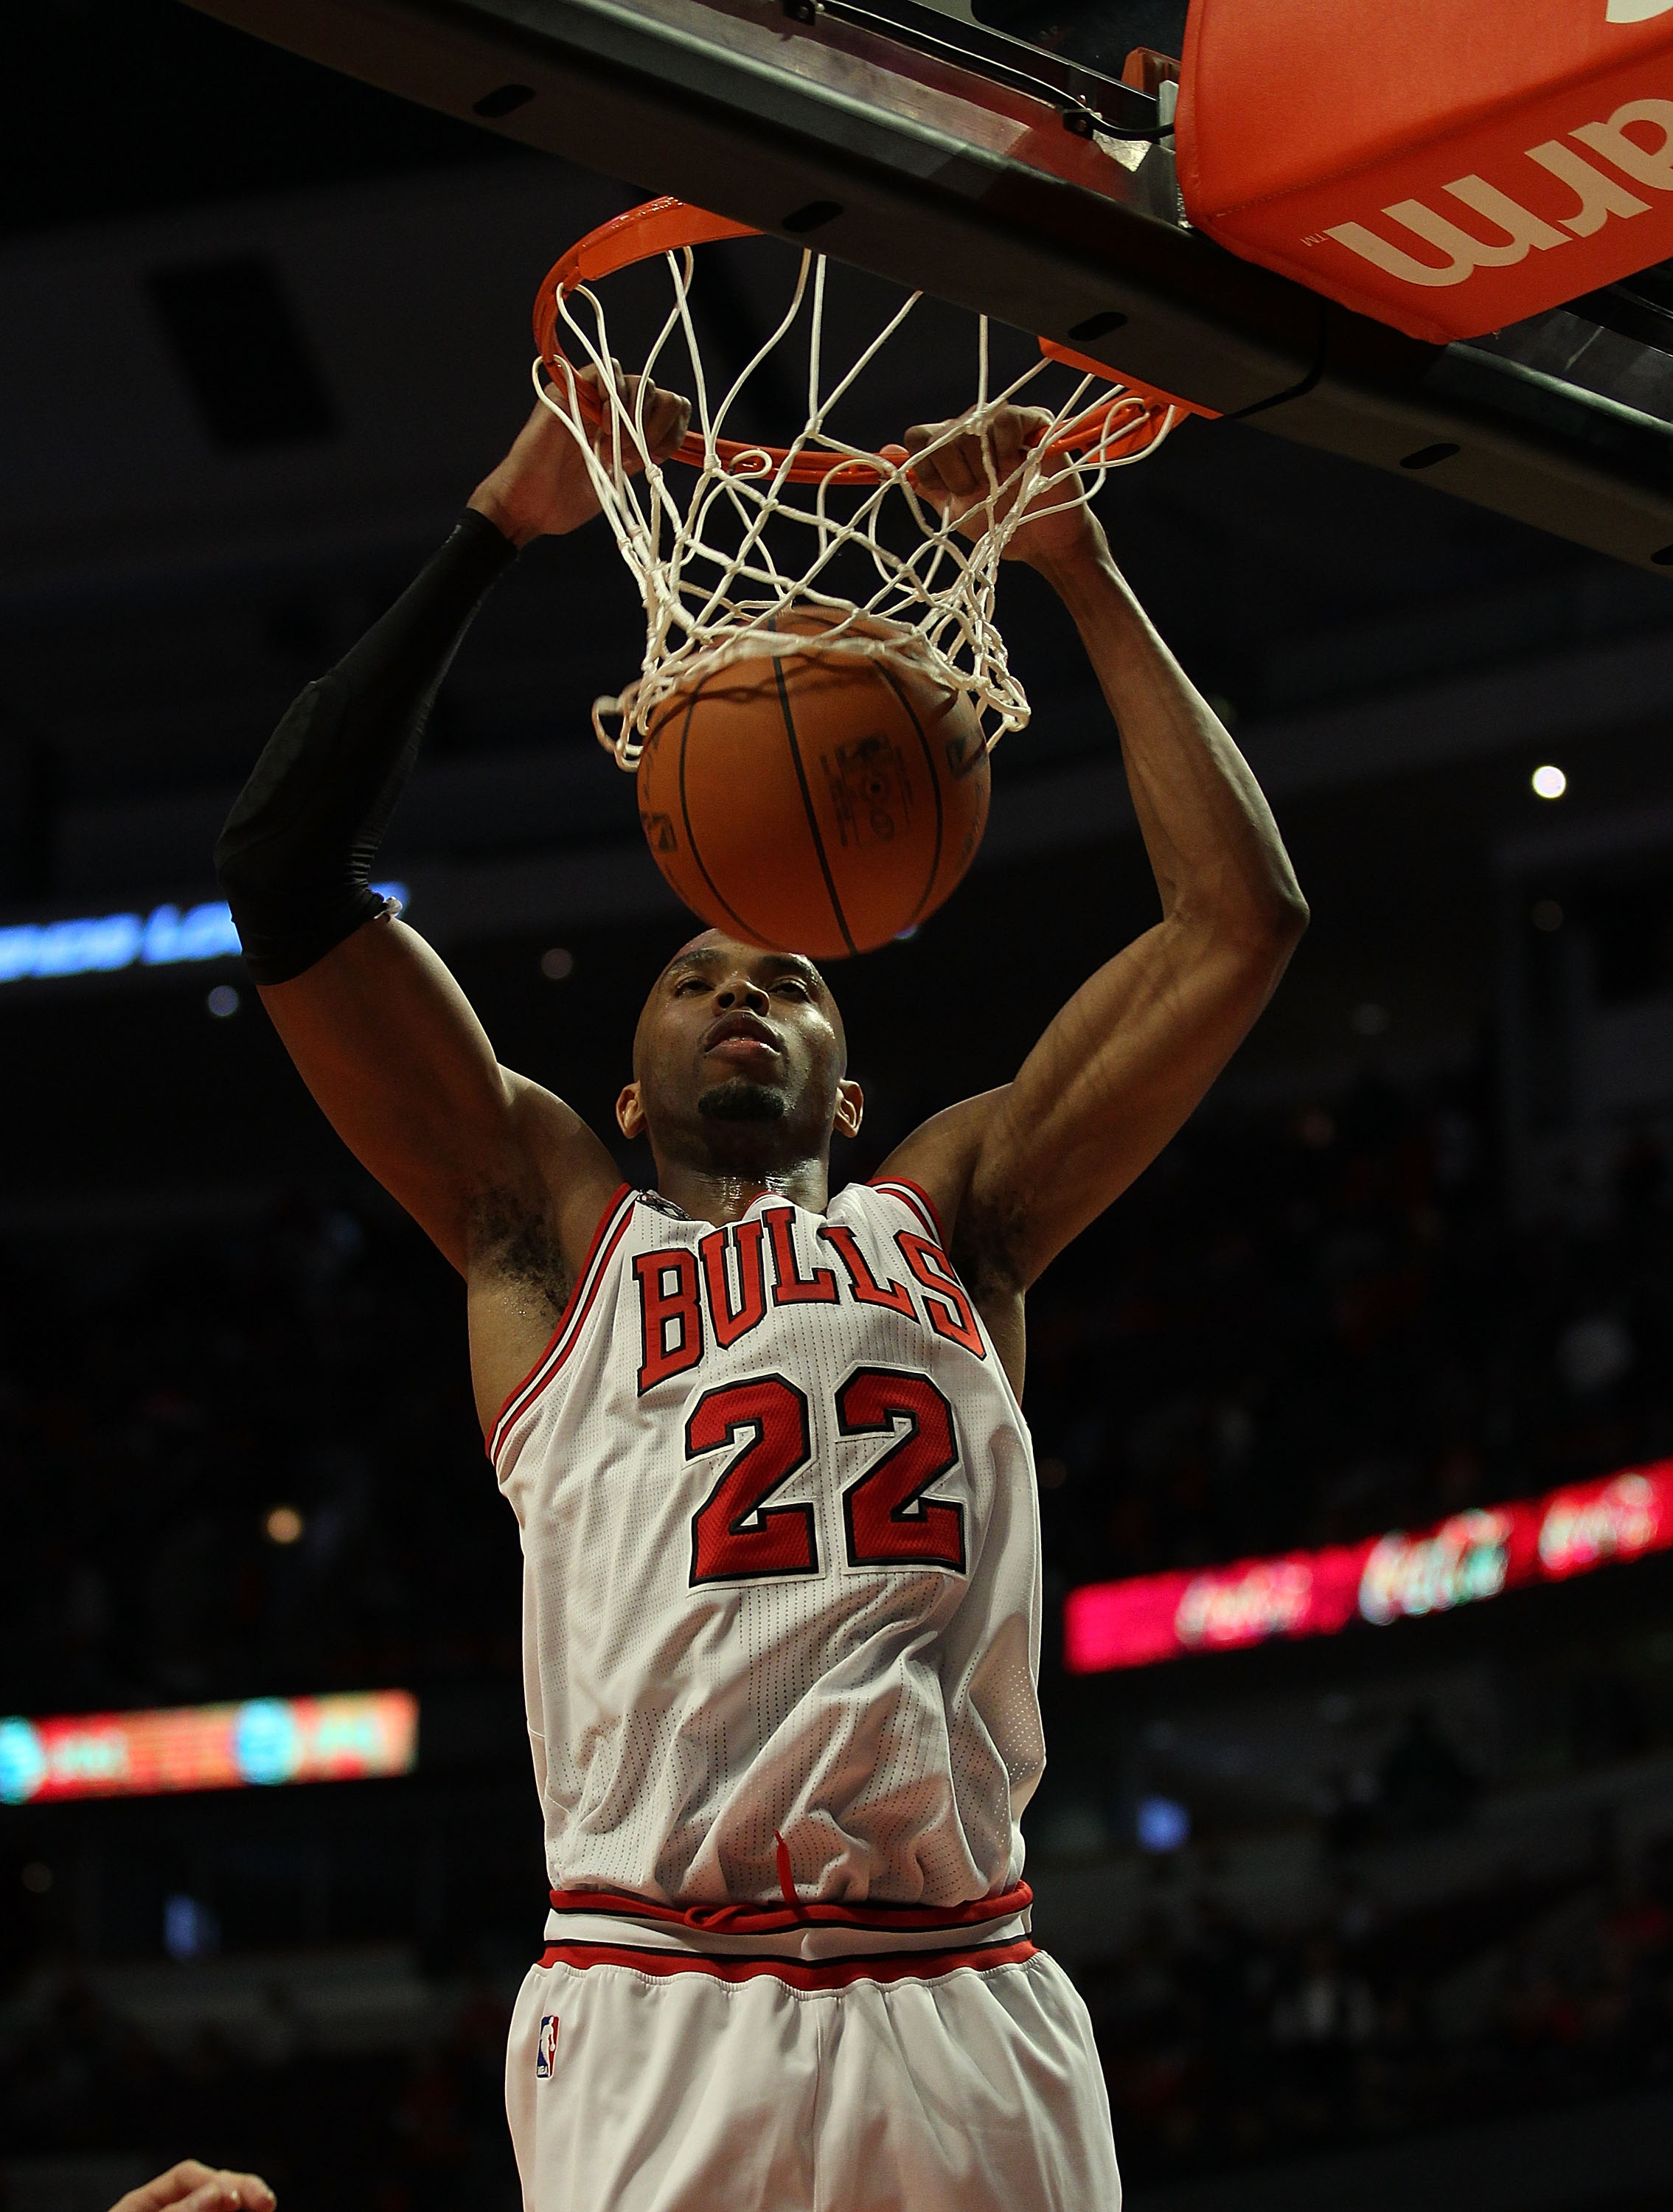 CHICAGO - NOVEMBER 01: Taj Gibson #22 of the Chicago Bulls dunks the ball against the Portland Trail Blazers at the United Center on November 1, 2010 in Chicago, Illinois. The Bulls defeated the Trail Blazers 110-98. NOTE TO USER: User expressly acknowled